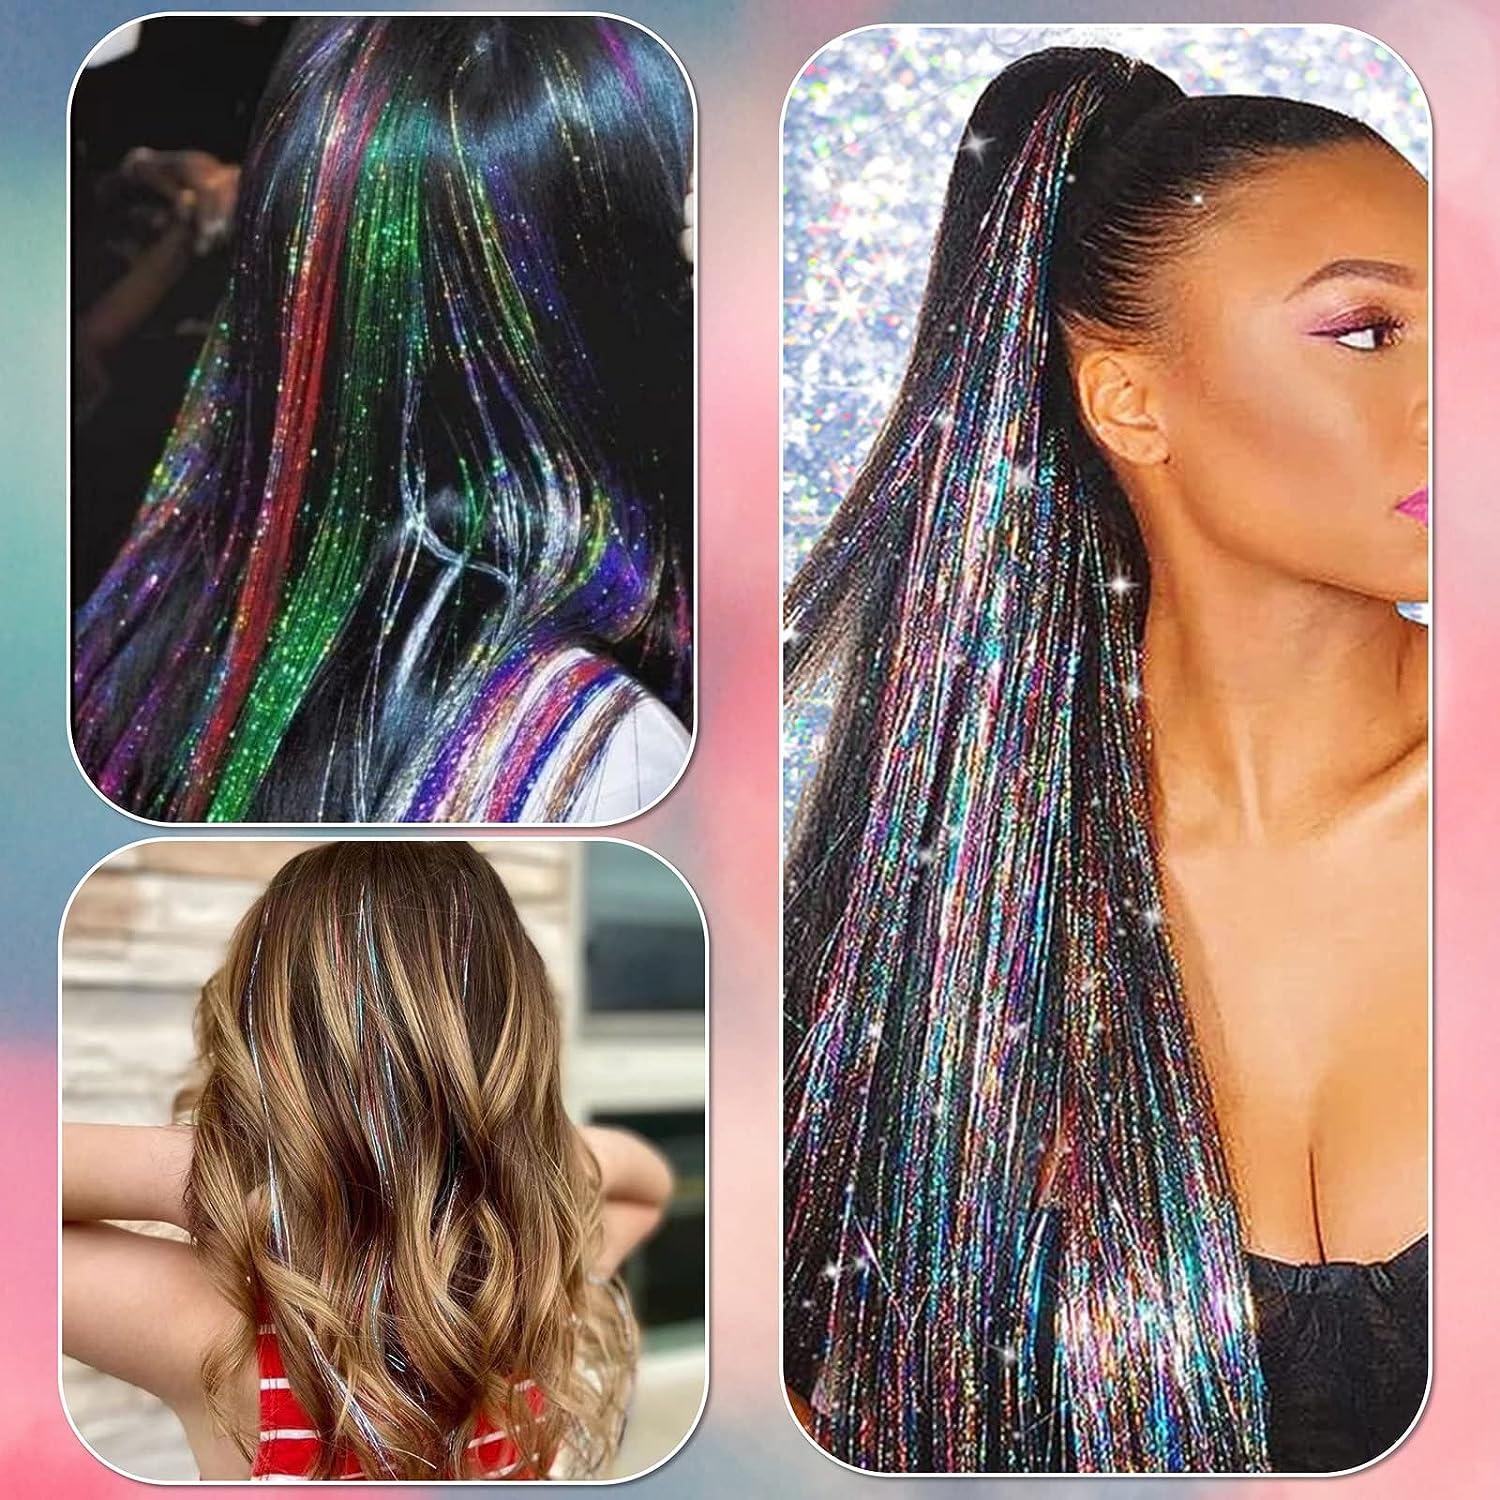 HOW TO PUT TINSEL IN YOUR HAIR  One of the most fun & easy hair